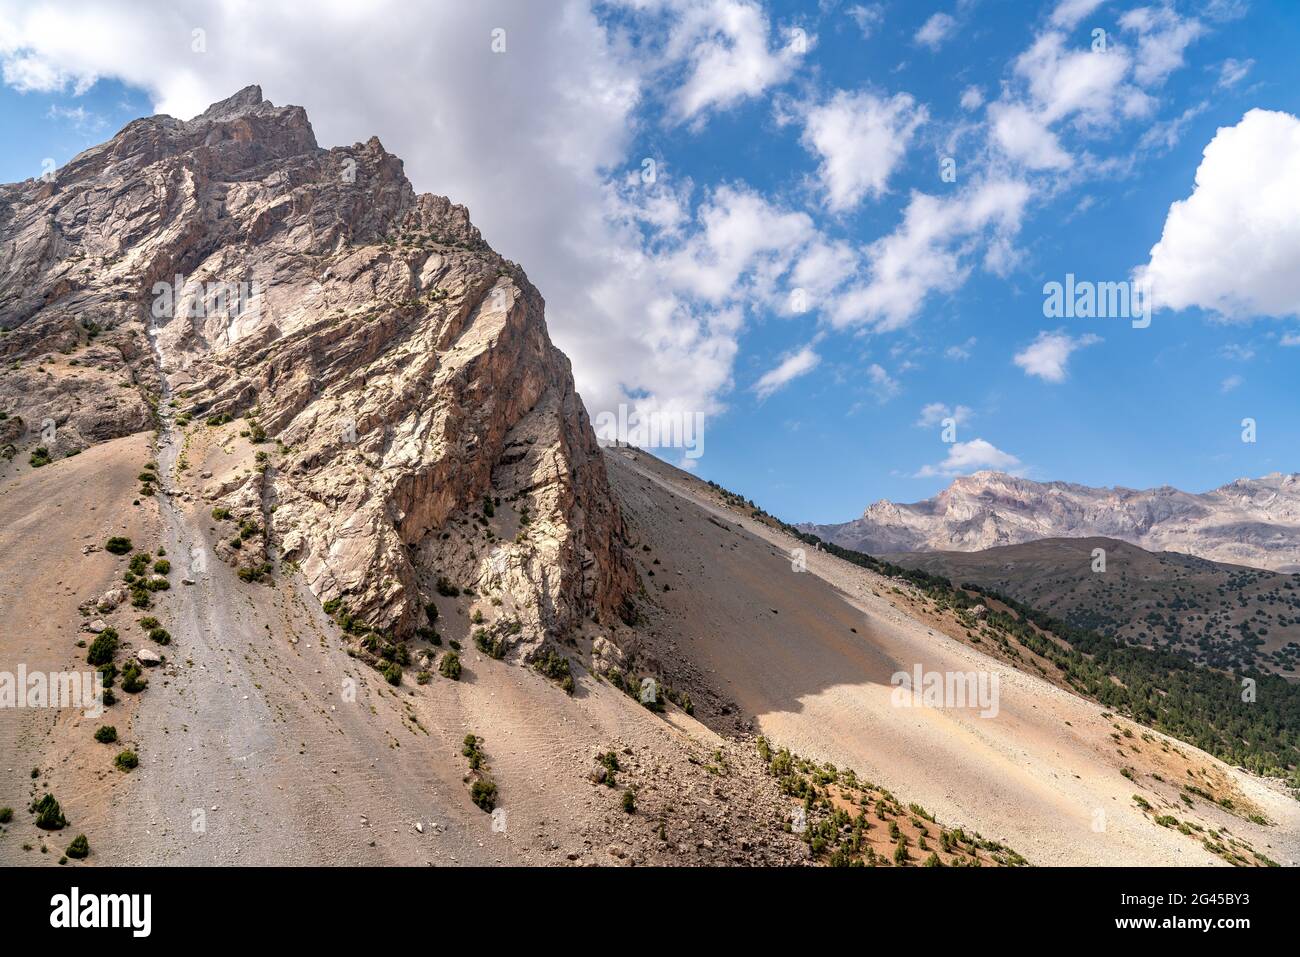 The beautiful mountain trekking road with clear blue sky and rocky hills in Fann mountains in Tajikistan Stock Photo